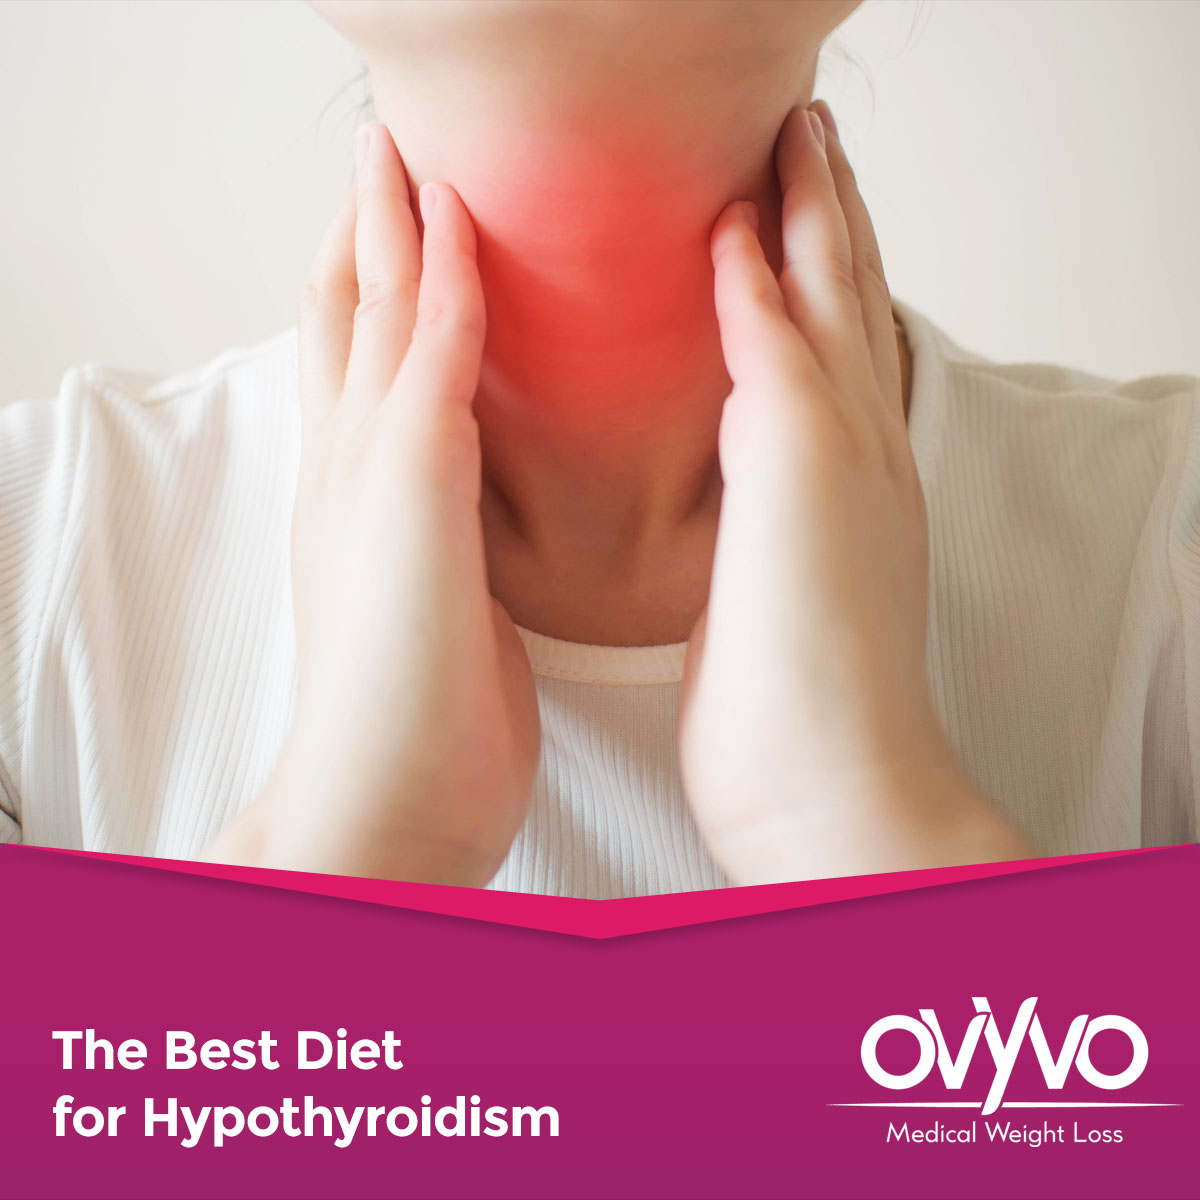 The Best Diet for Hypothyroidism